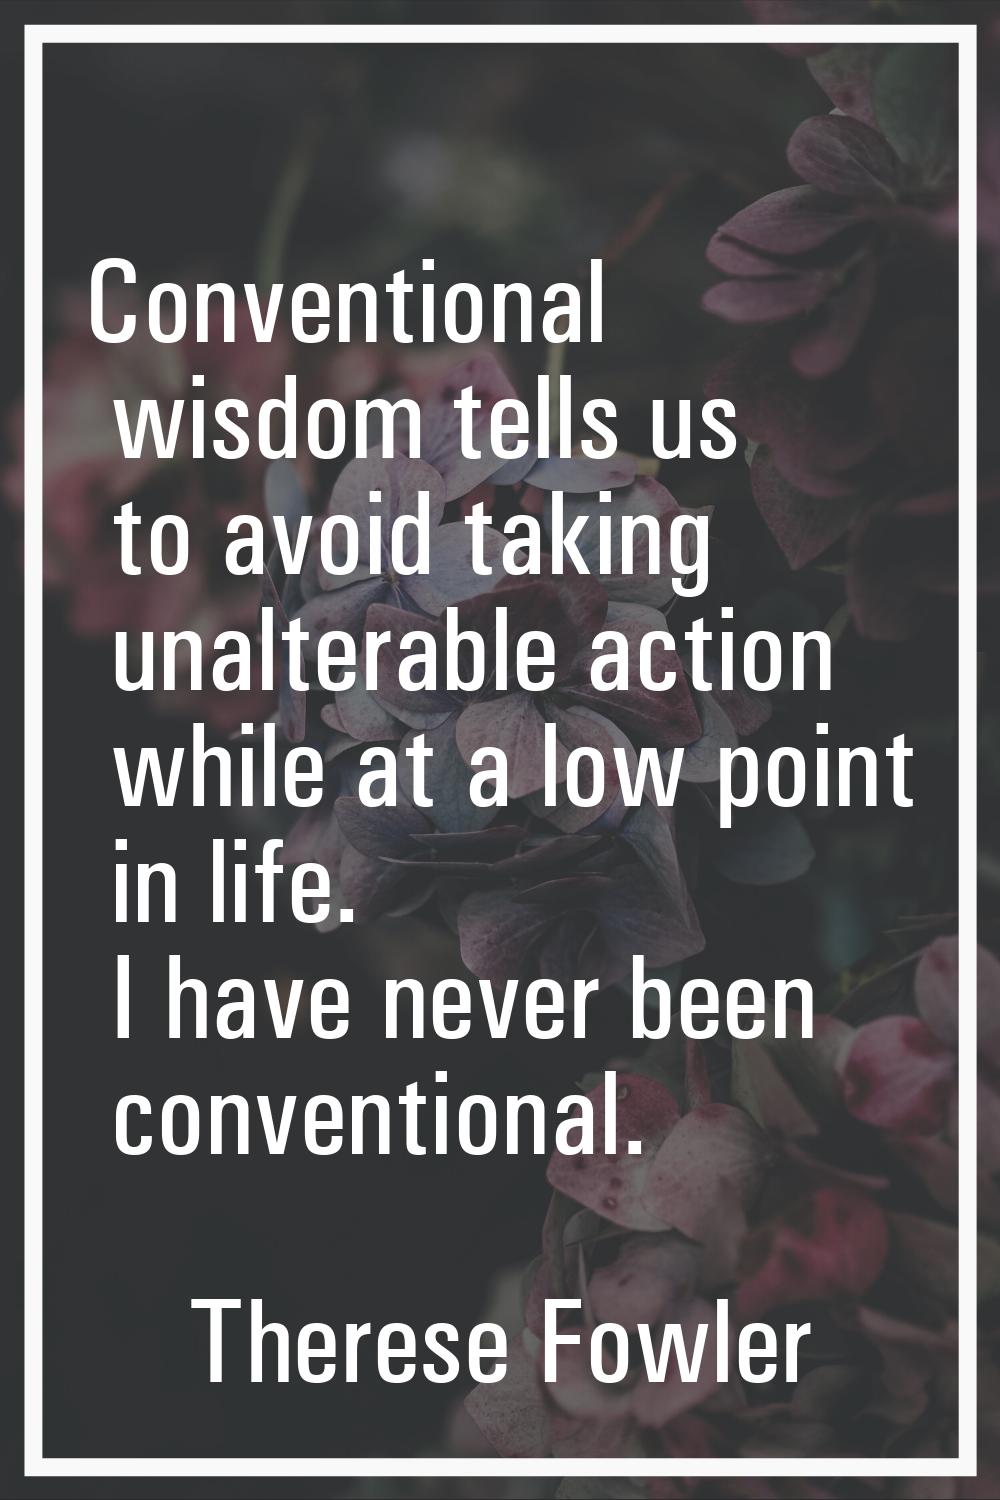 Conventional wisdom tells us to avoid taking unalterable action while at a low point in life. I hav